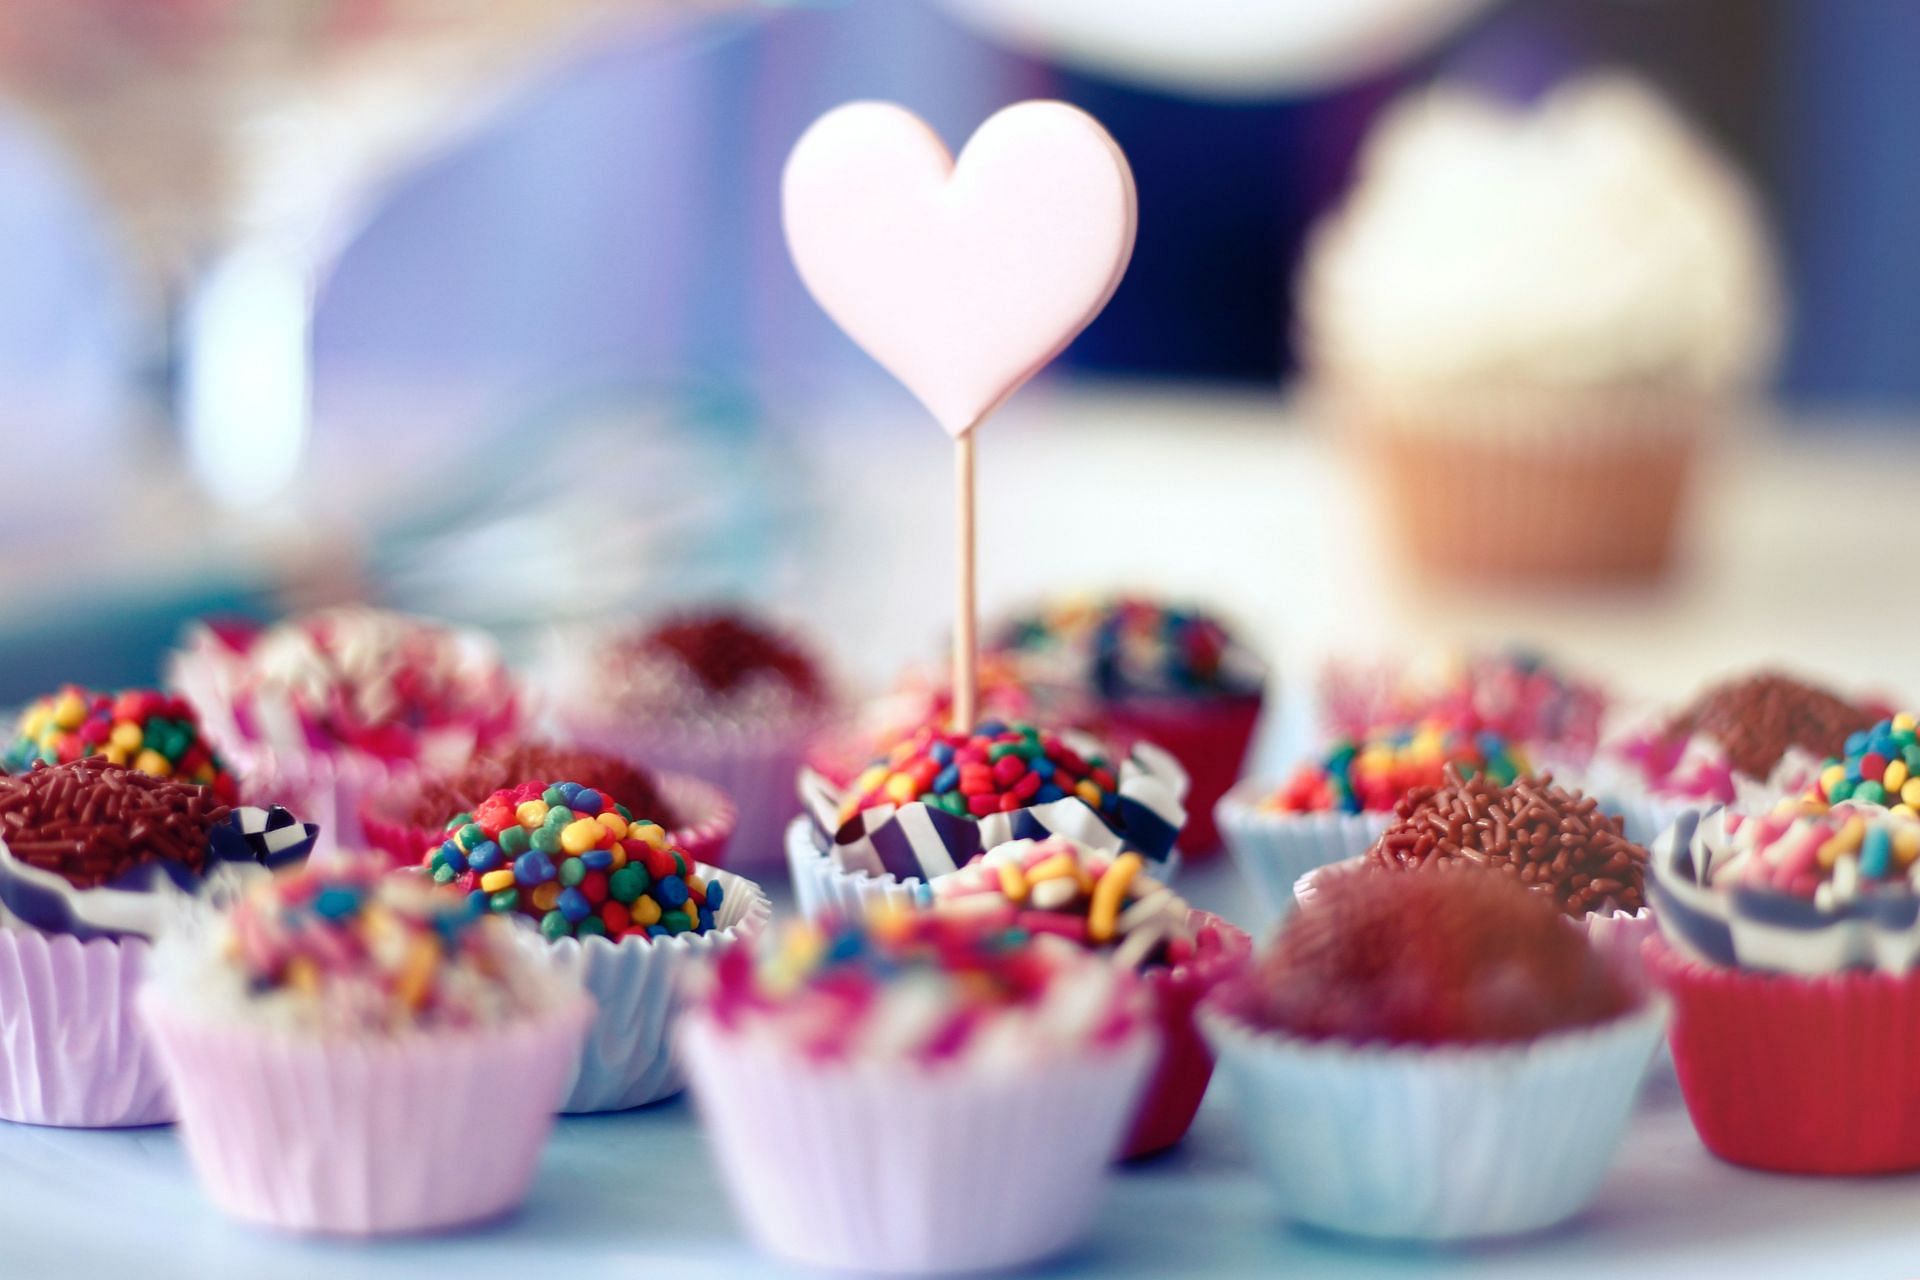 Being a sweet tooth may not be helping with your brain health. (Image via Pexels/ Carolina Almeida)